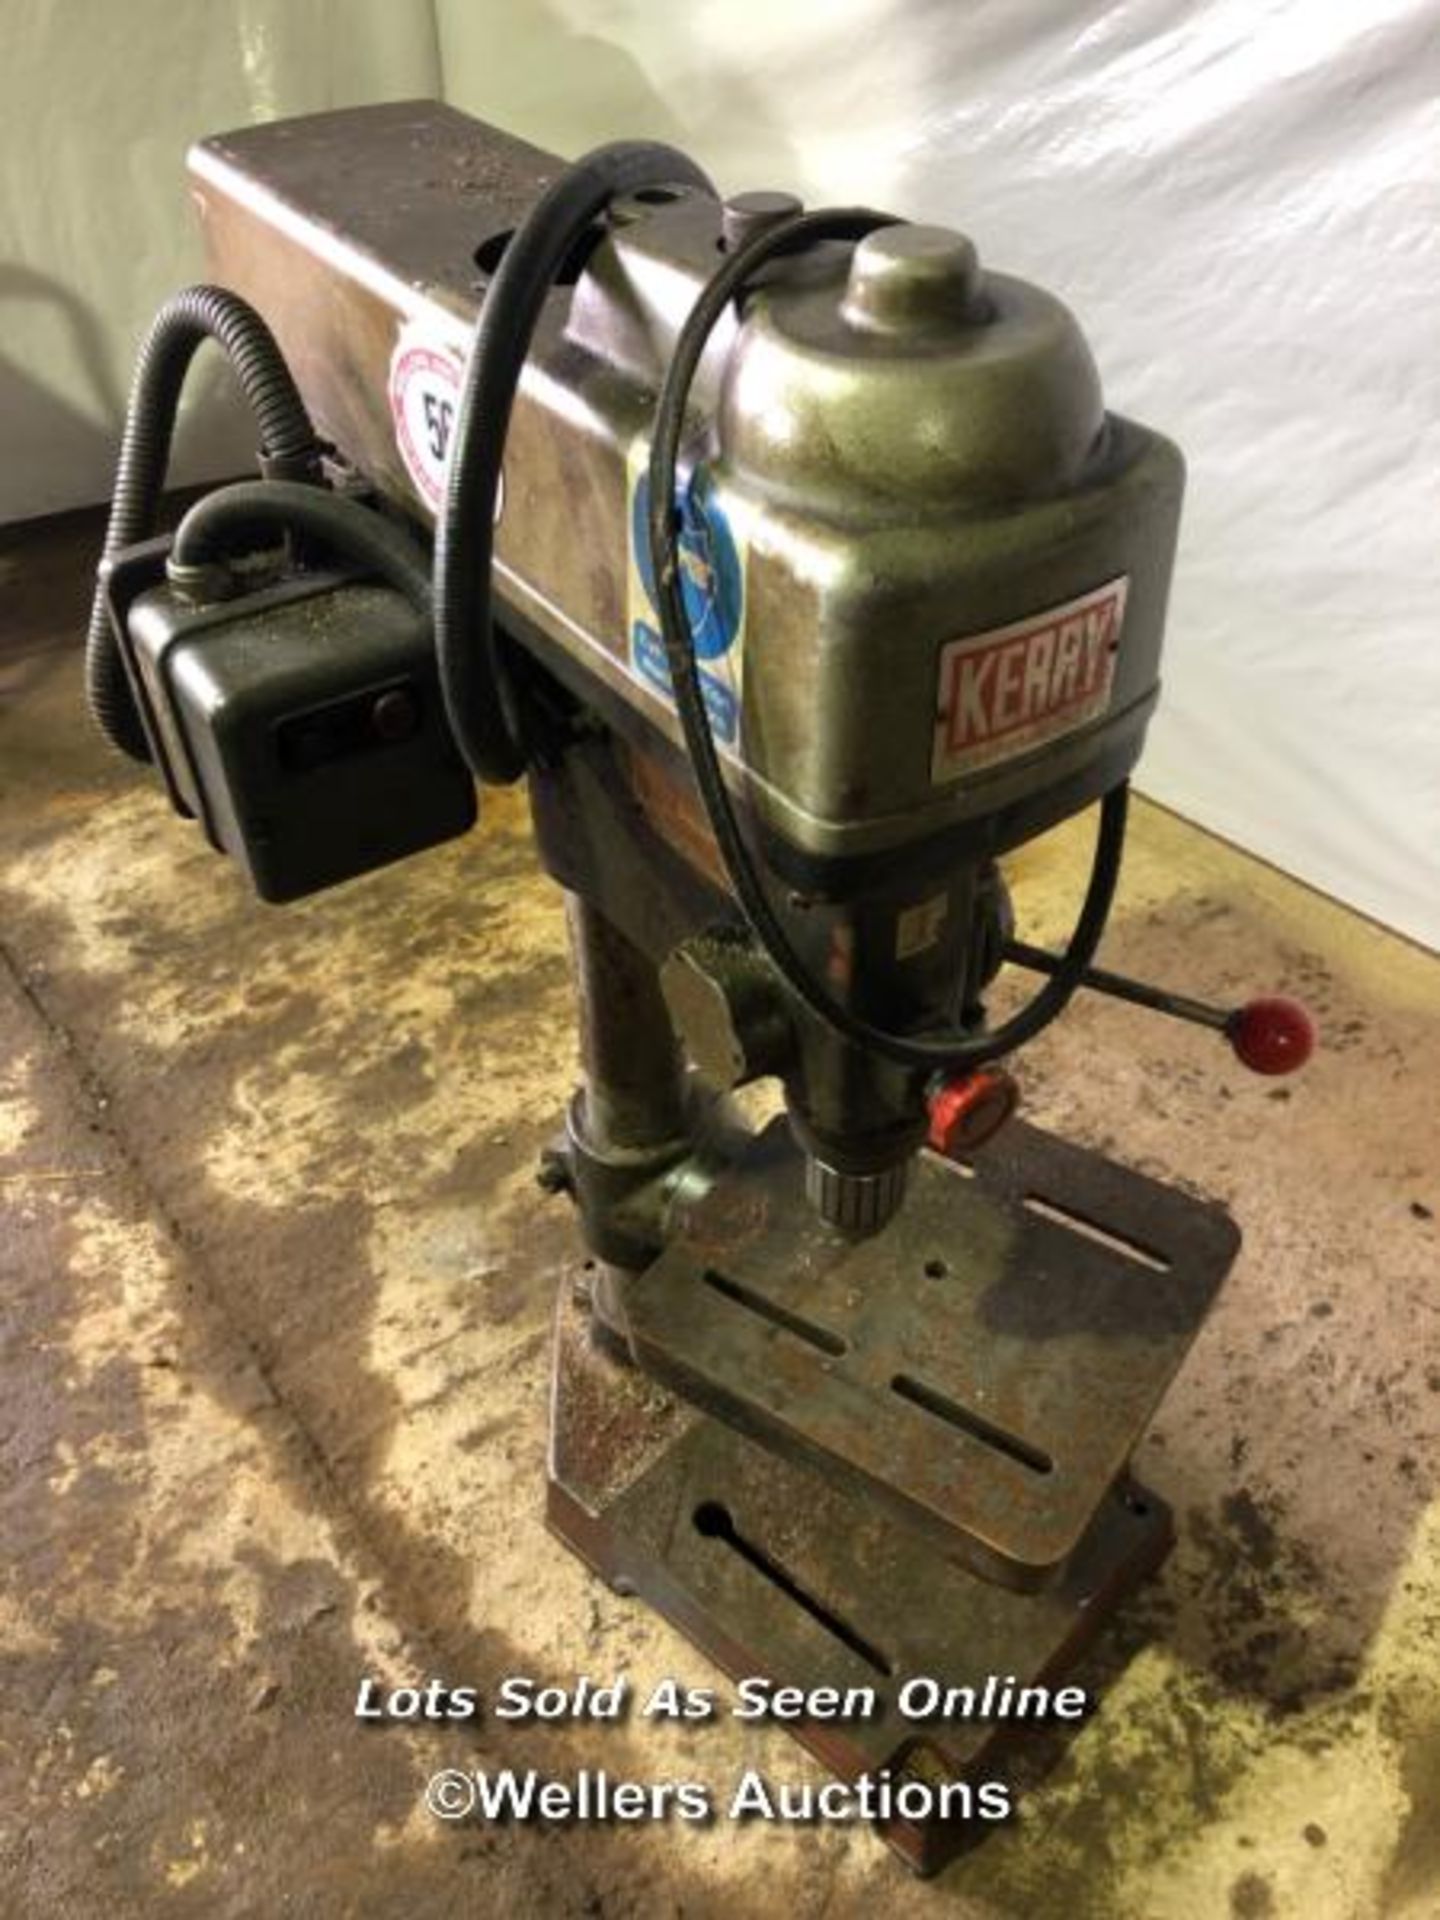 KERRY 3 PHASE BENCH DRILL WITH ADJUSTABLE TWIN DRILL HEAD, IN WORKING ORDER